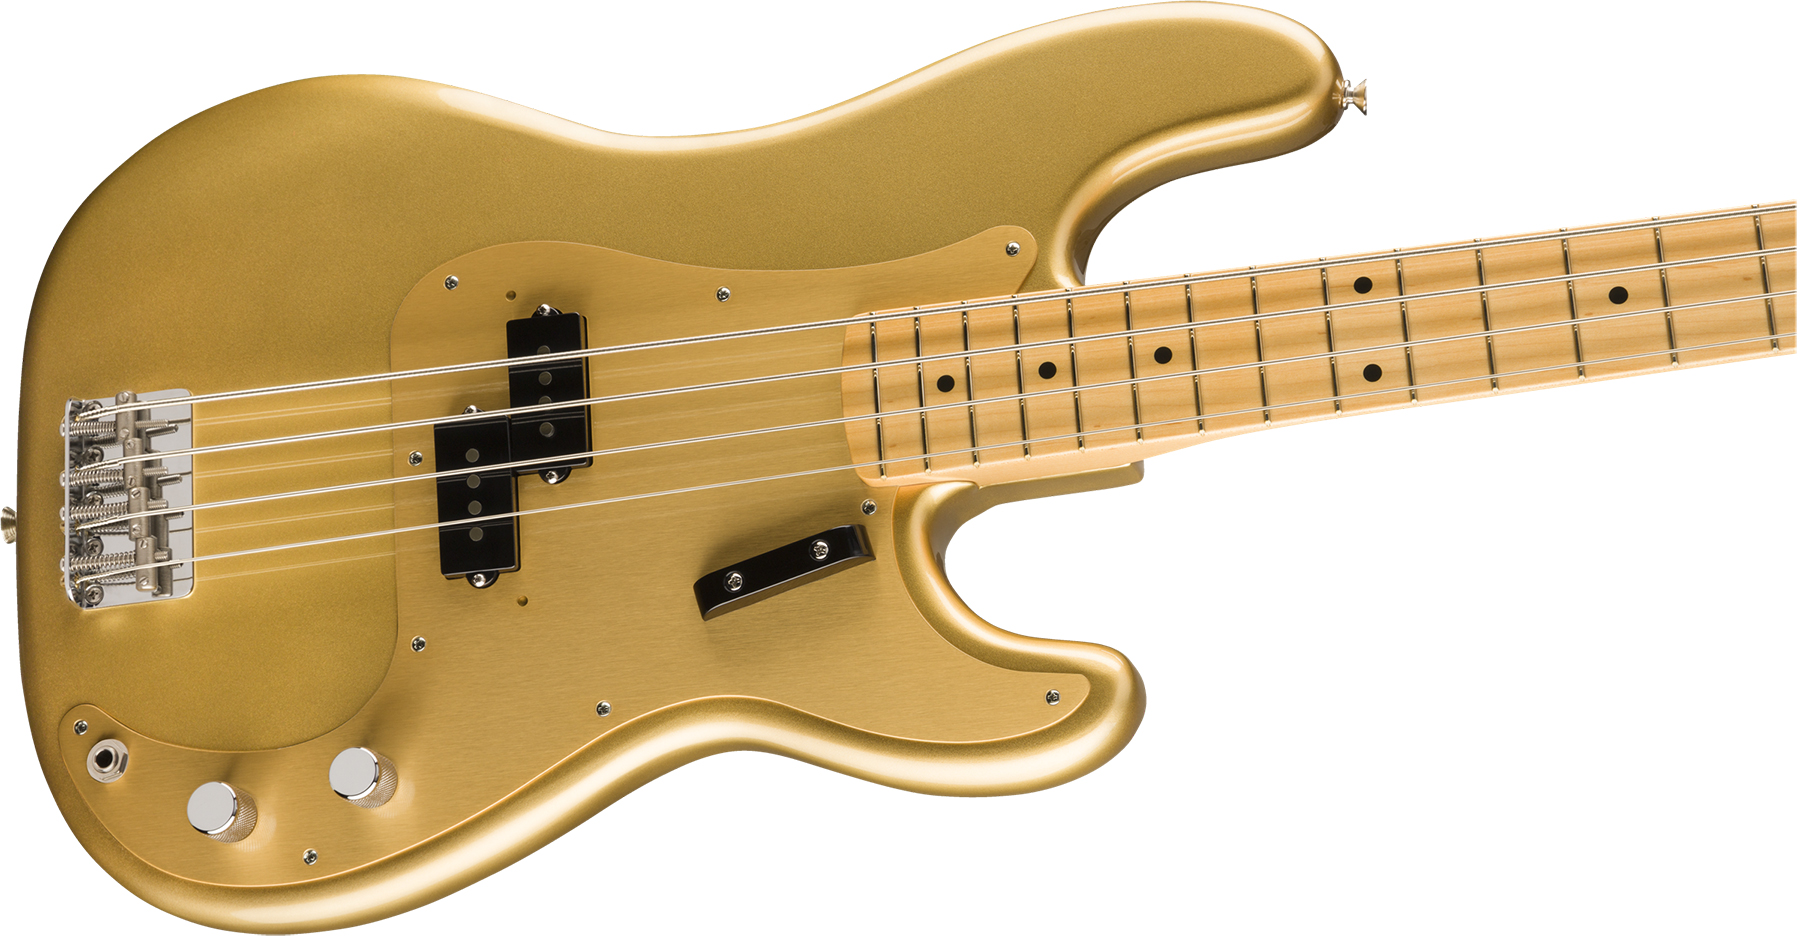 Fender Precision Bass '50s American Original Usa Mn - Aztec Gold - Solid body electric bass - Variation 1